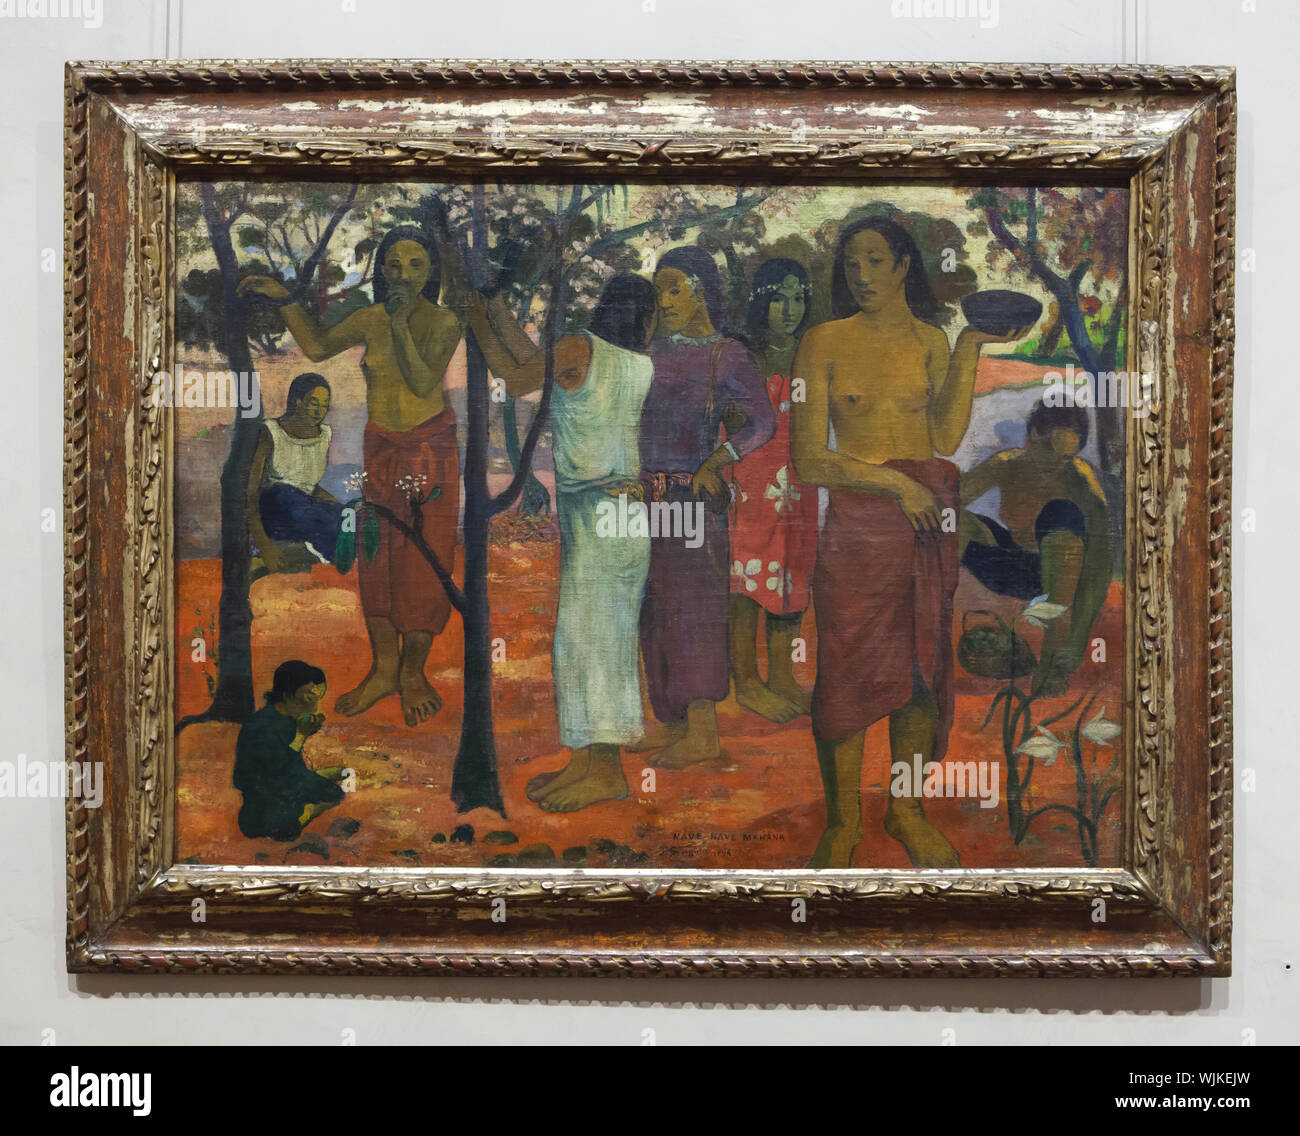 Painting 'Nave Nave Mahana' ('Delightful Days') by French post-impressionist painter Paul Gauguin (1896) on display in the Museum of Fine Arts (Musée des Beaux-Arts de Lyon) in Lyon, France. Stock Photo